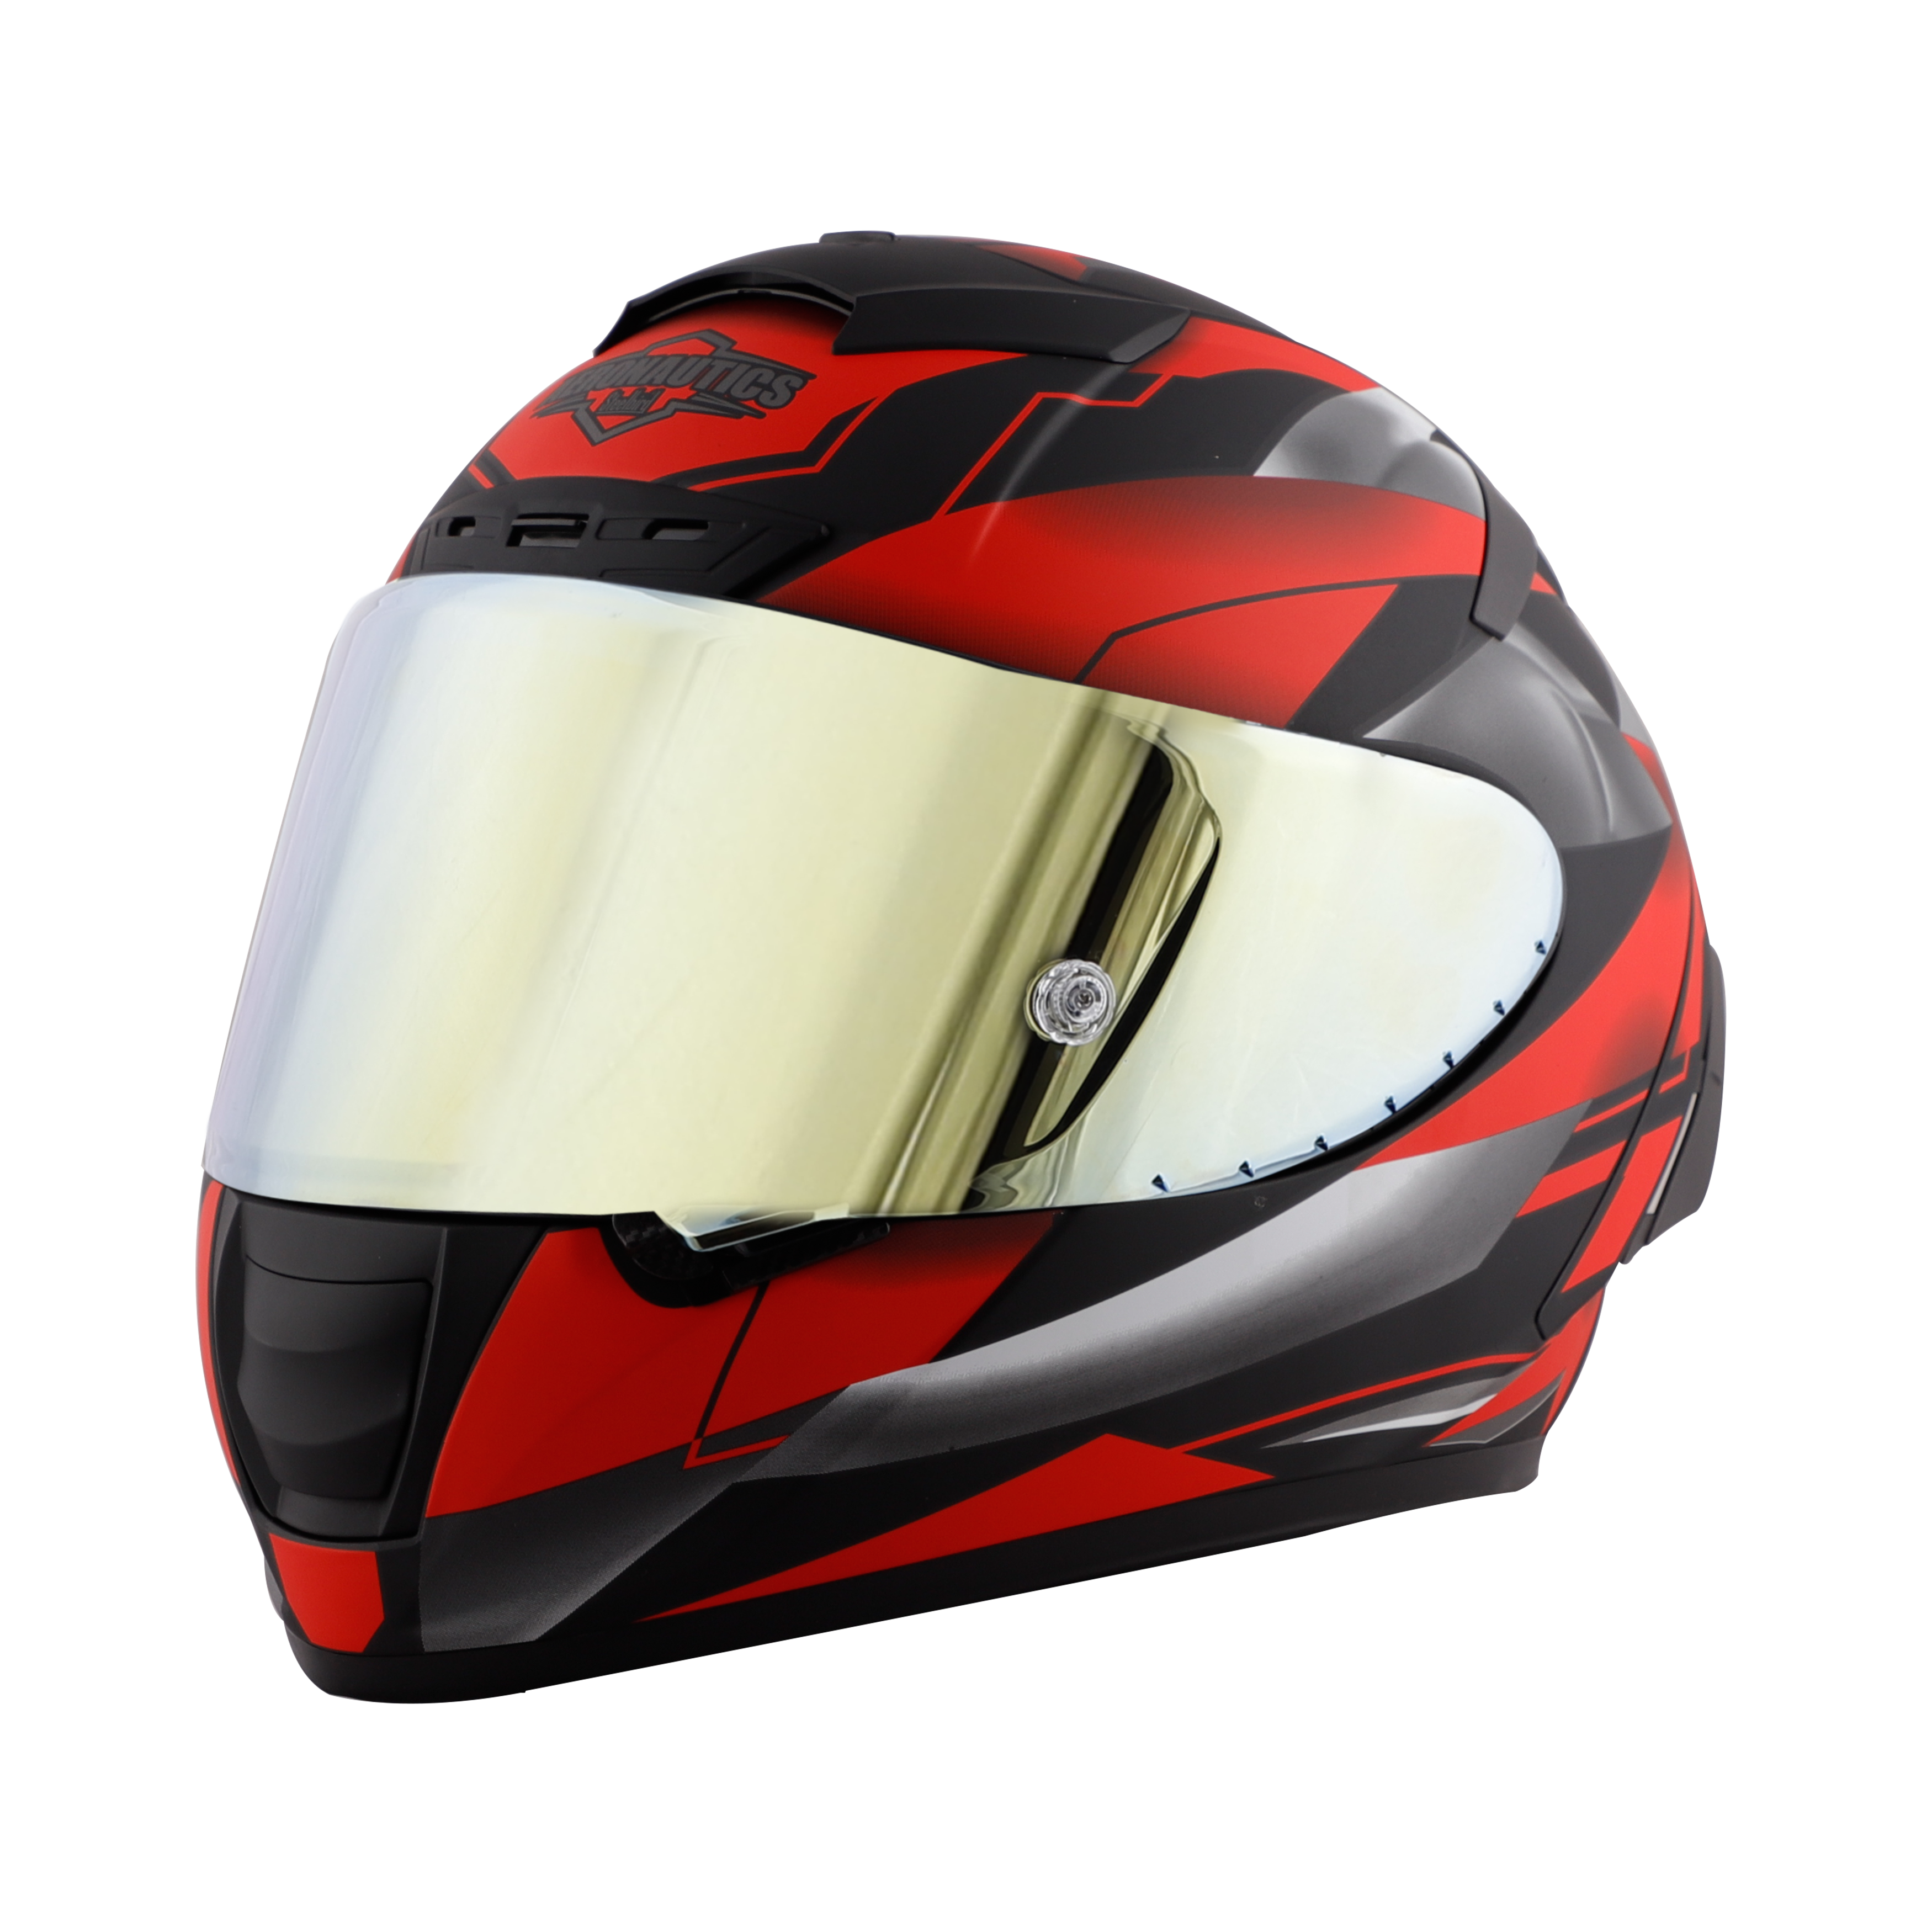 SA-2 METALLIC GLOSSY BLACK WITH RED ( FITTED WITH CLEAR VISOR  EXTRA CHROME GOLD VISOR FREE) WITH ANTI-FOG SHIELD HOLDER